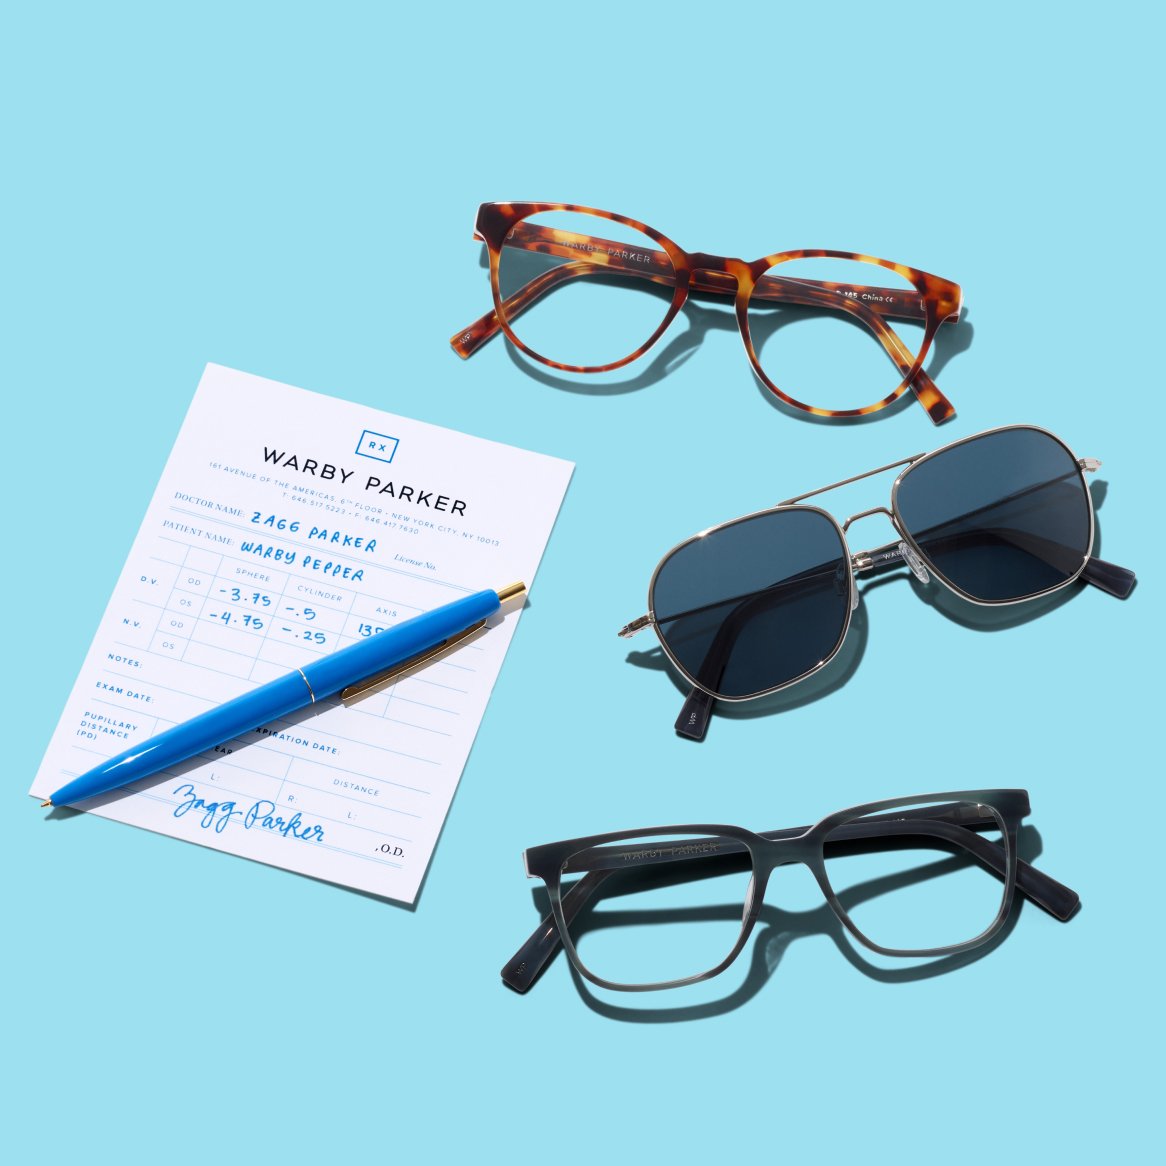 image of a pair of eyeglasses and sunglasses with a written prescription